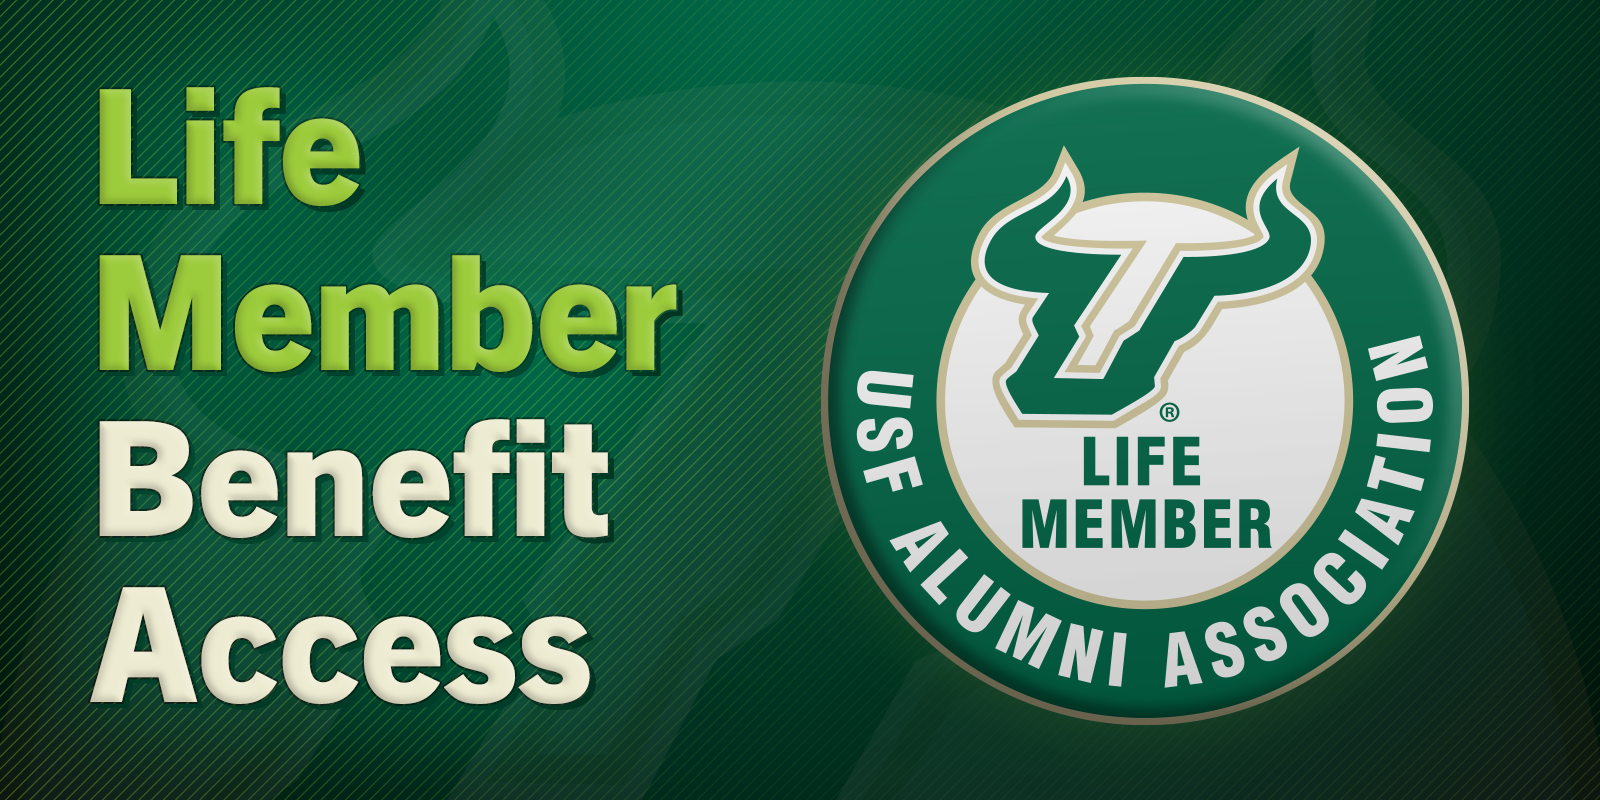 Life Member Benefit Access Request